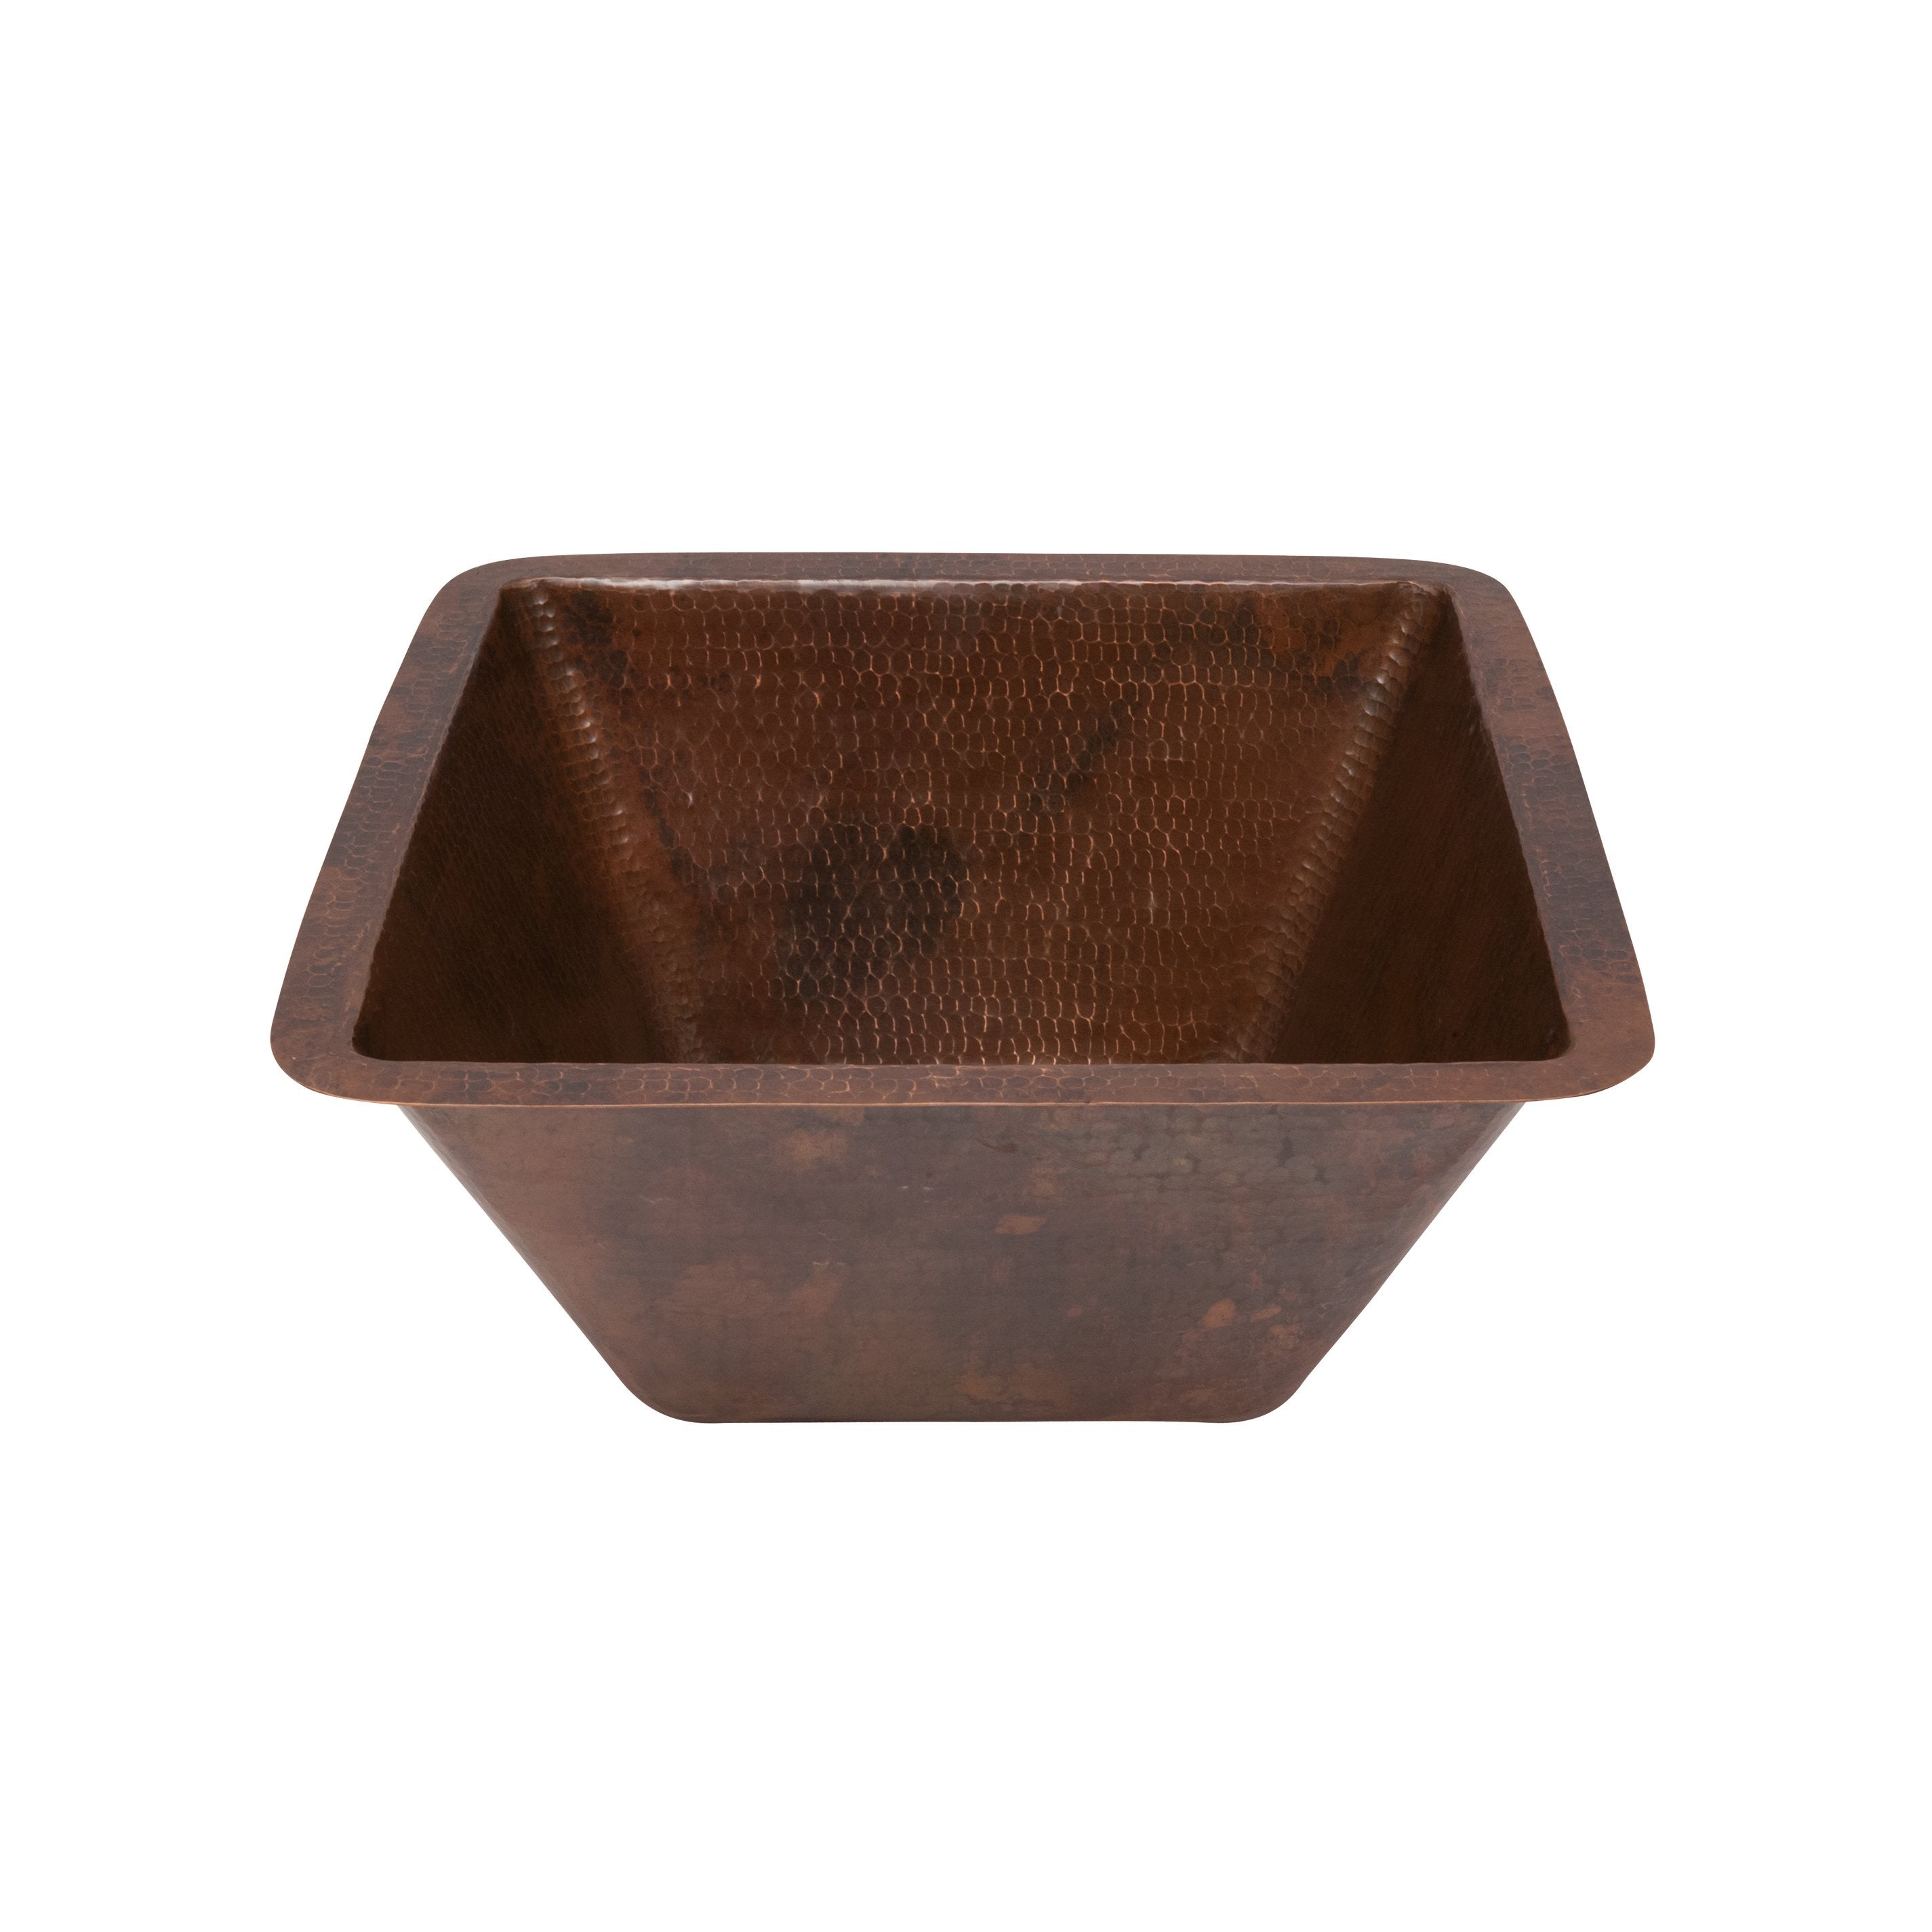 Premier Copper Products 15" Square Under Counter Hammered Copper Bathroom Sink-DirectSinks